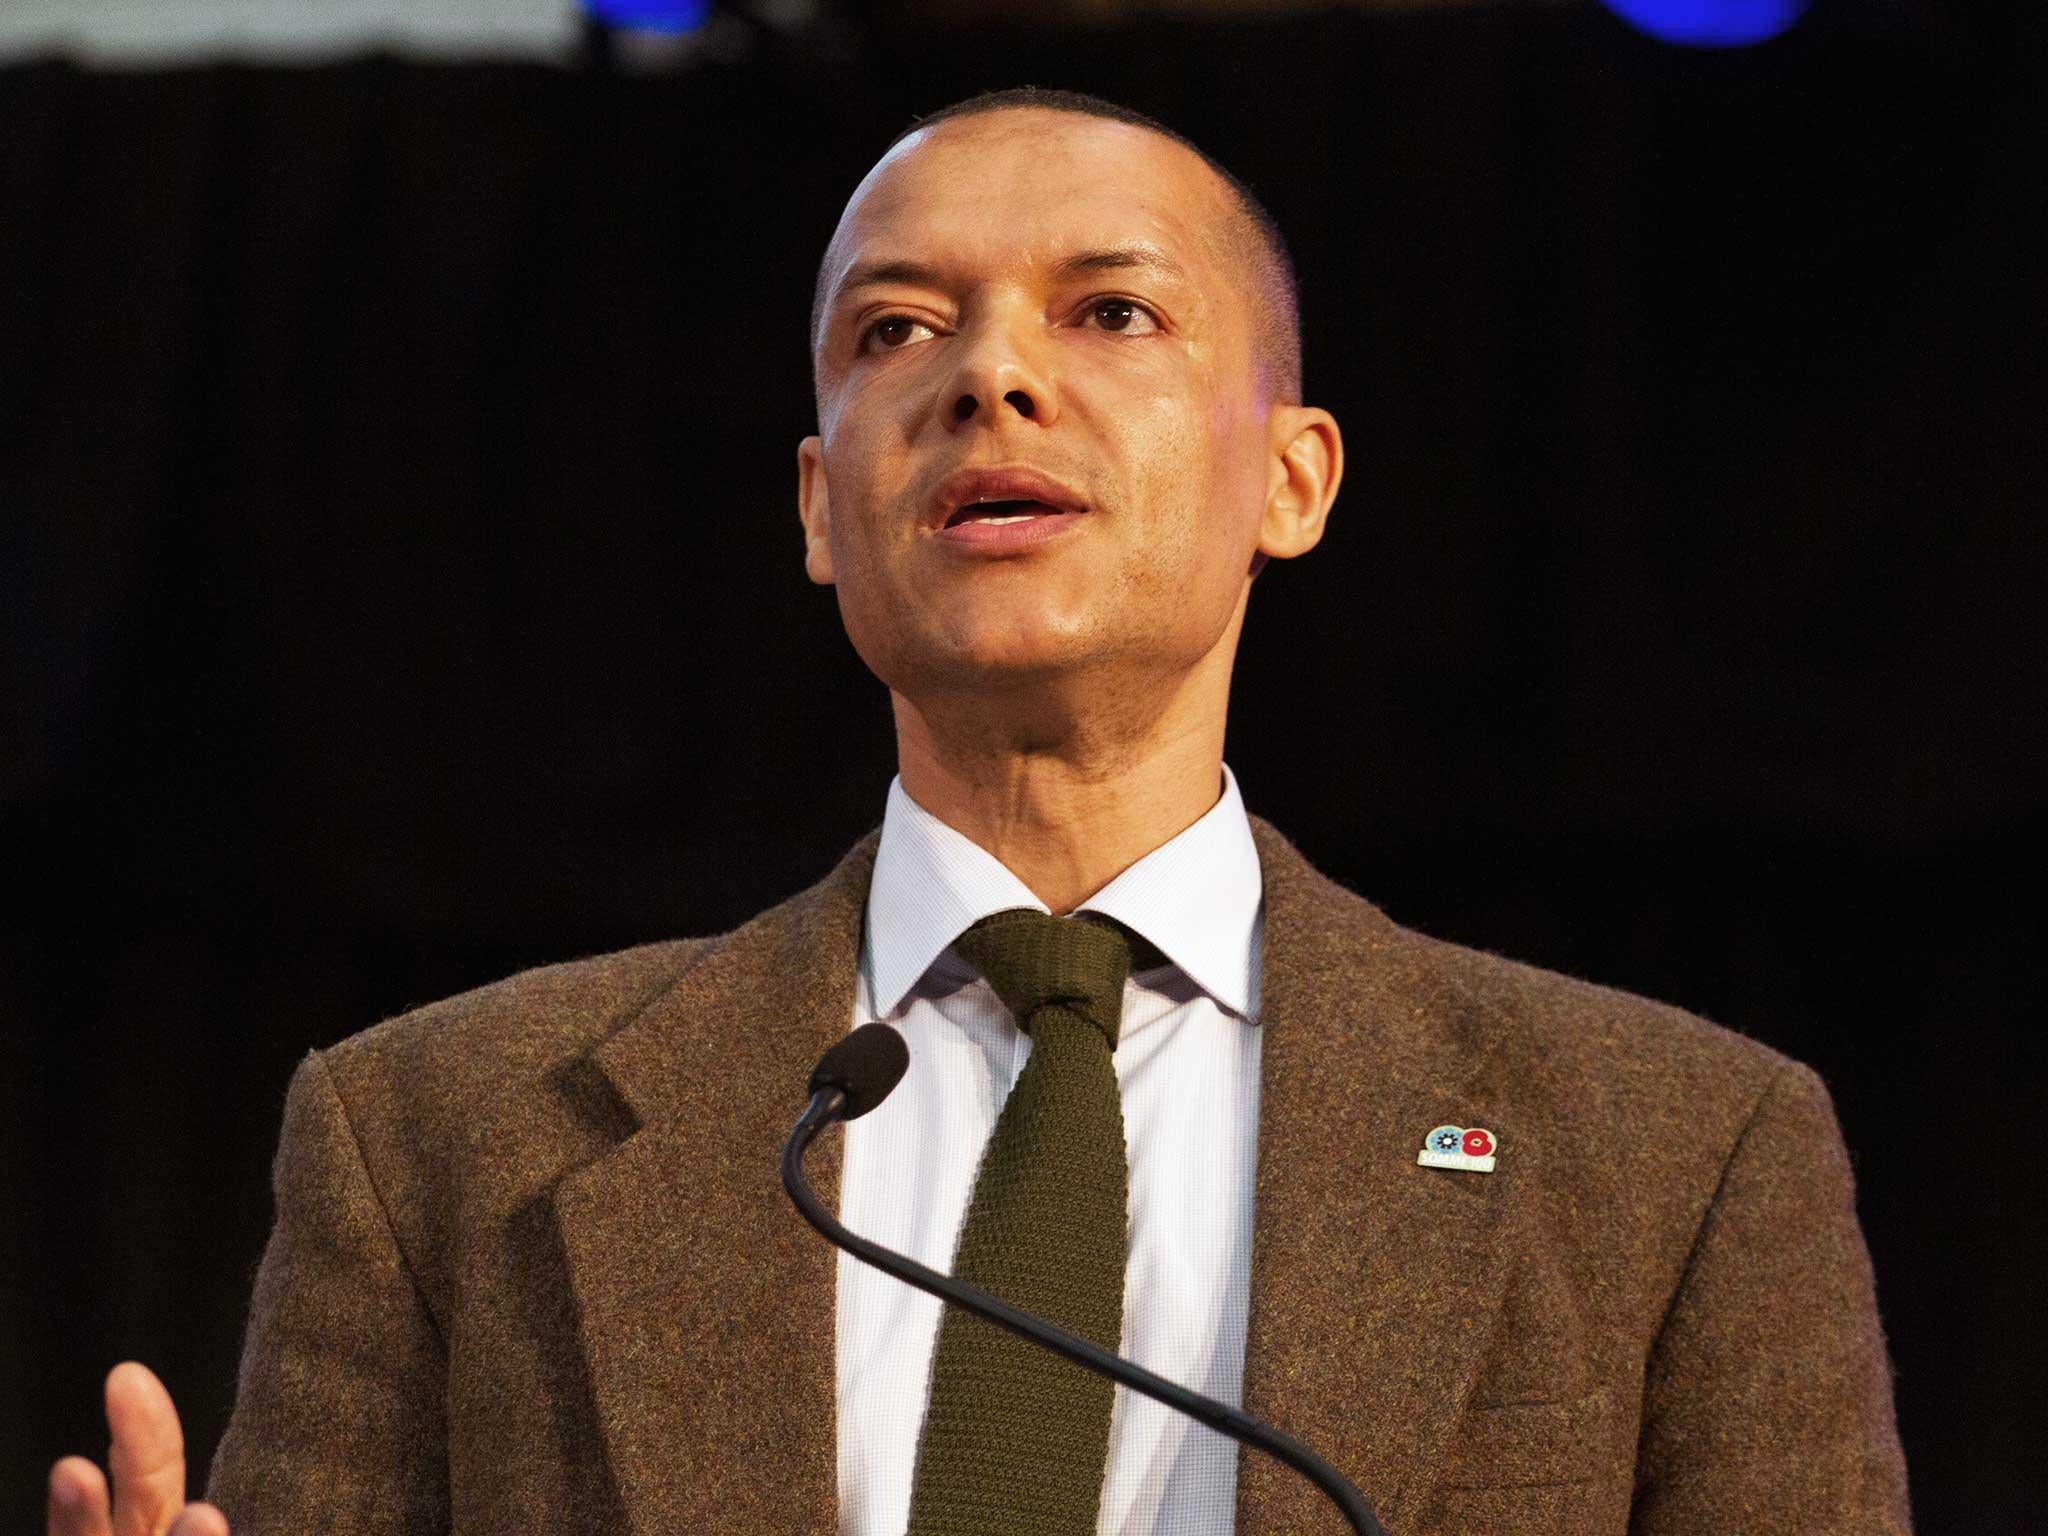 Clive Lewis MP says he is prepared to flout Labour's three-line whip